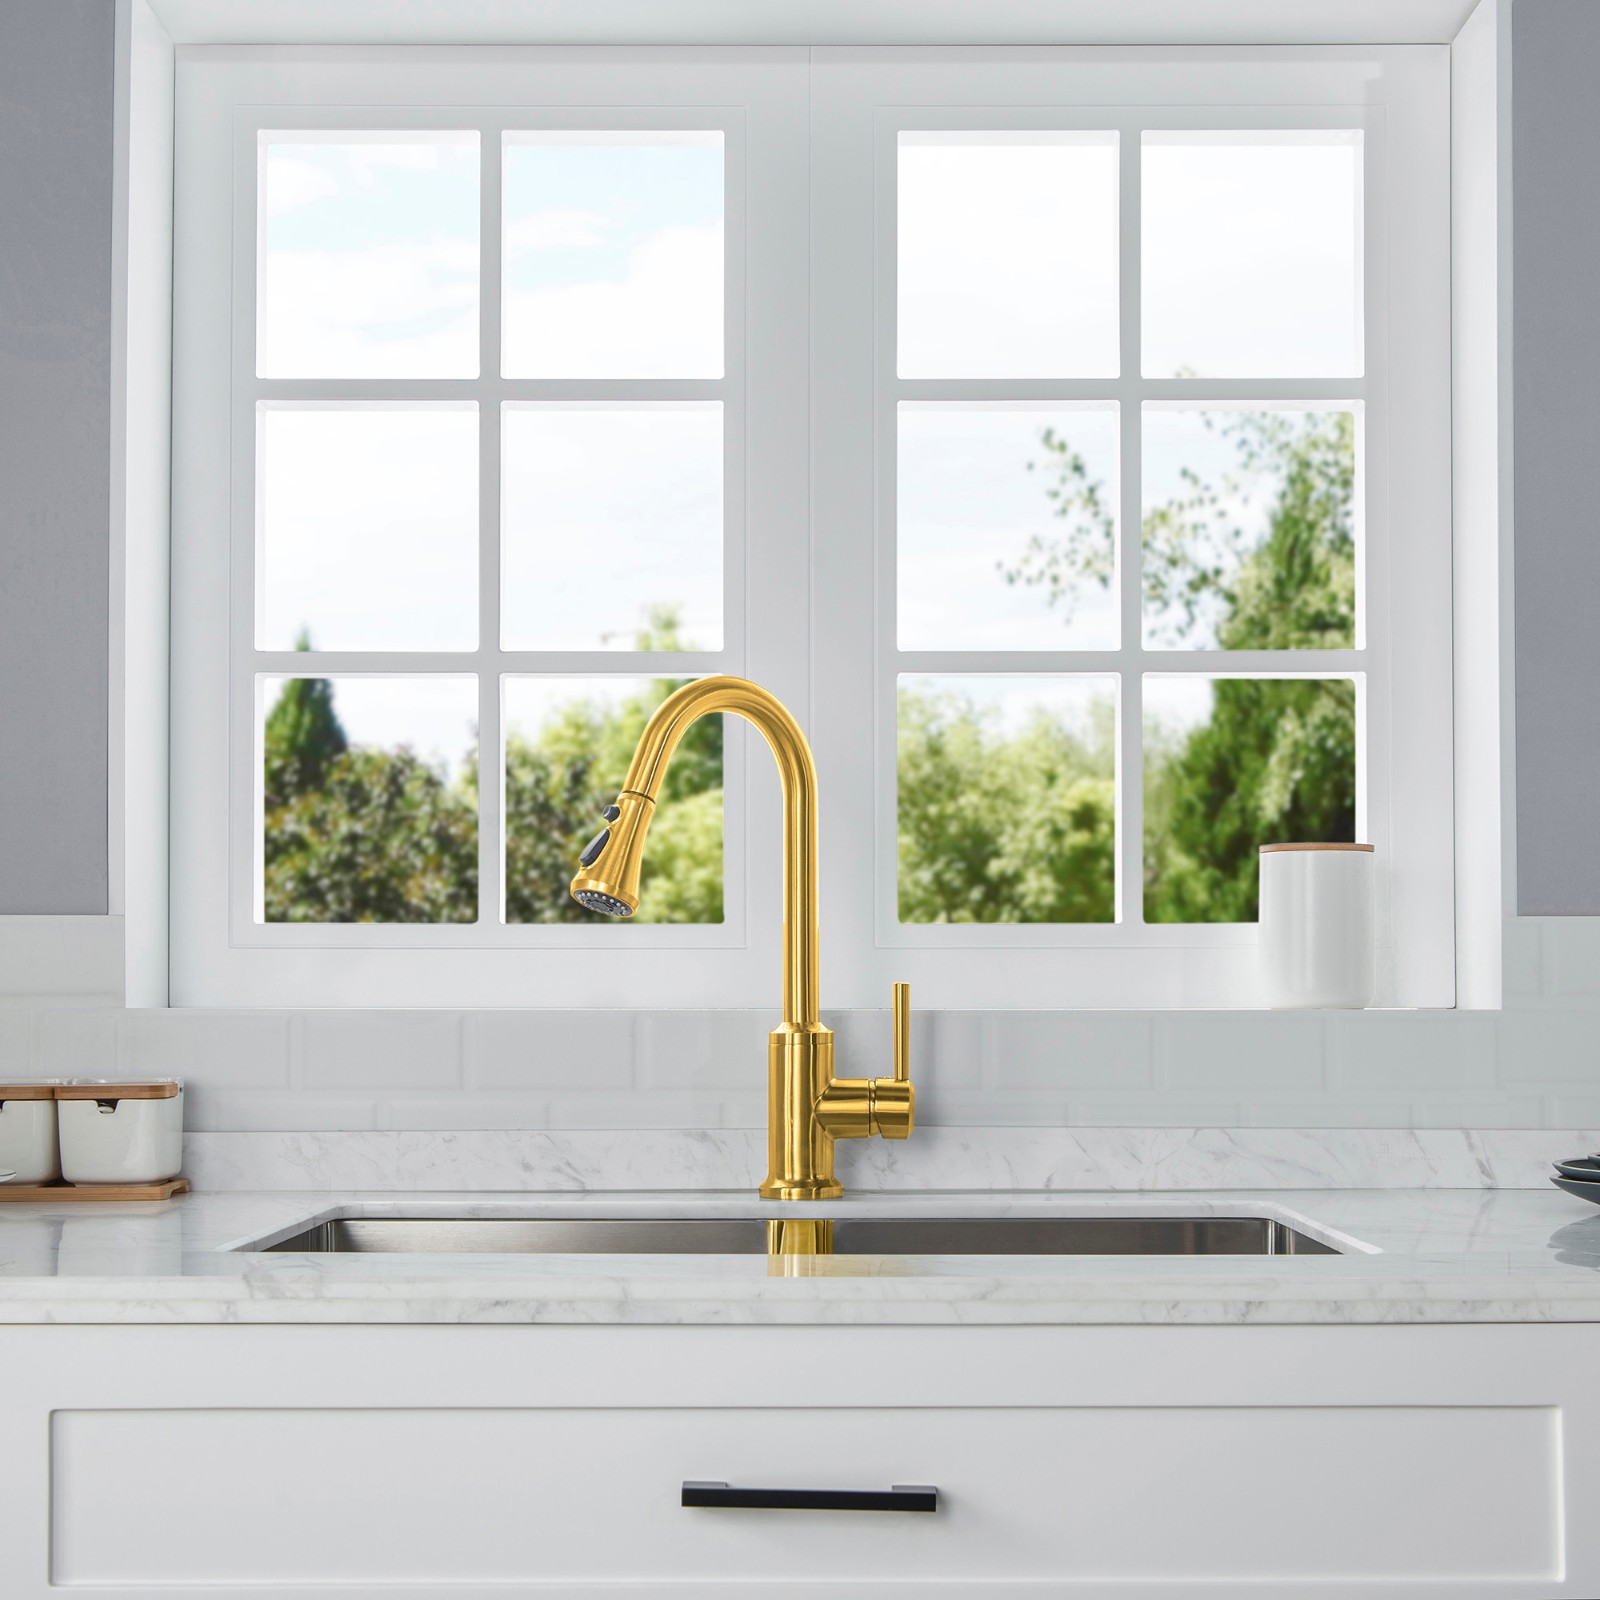  WOODBRIDGE WK101201BG Stainless Steel Single Handle Pull Down Kitchen Faucet in Brushed Gold Finish._5000